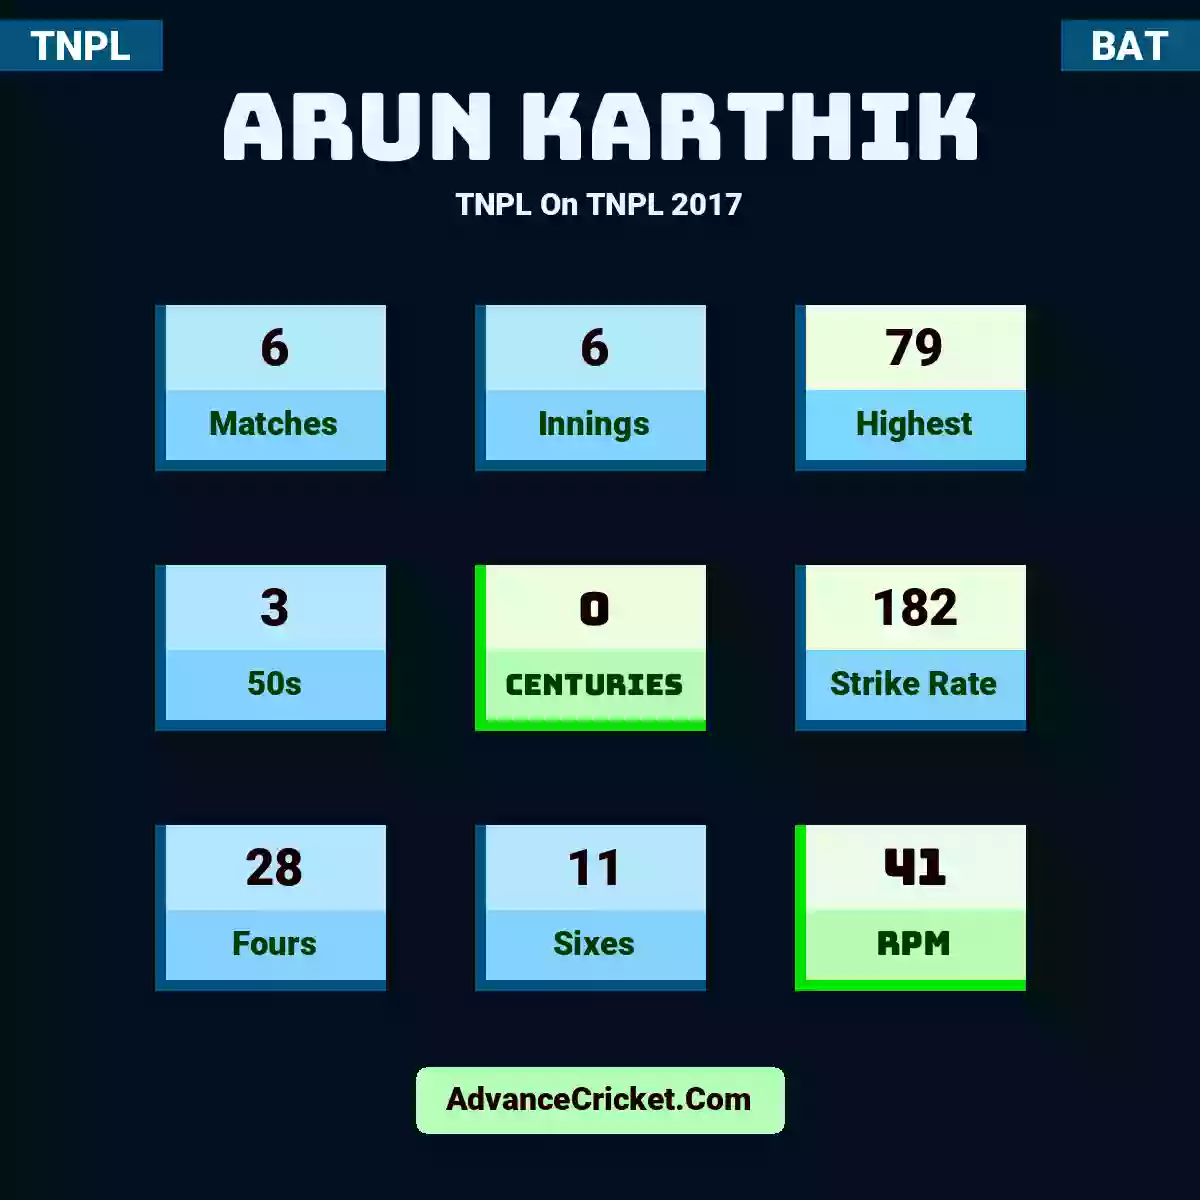 Arun Karthik TNPL  On TNPL 2017, Arun Karthik played 6 matches, scored 79 runs as highest, 3 half-centuries, and 0 centuries, with a strike rate of 182. A.Karthik hit 28 fours and 11 sixes, with an RPM of 41.